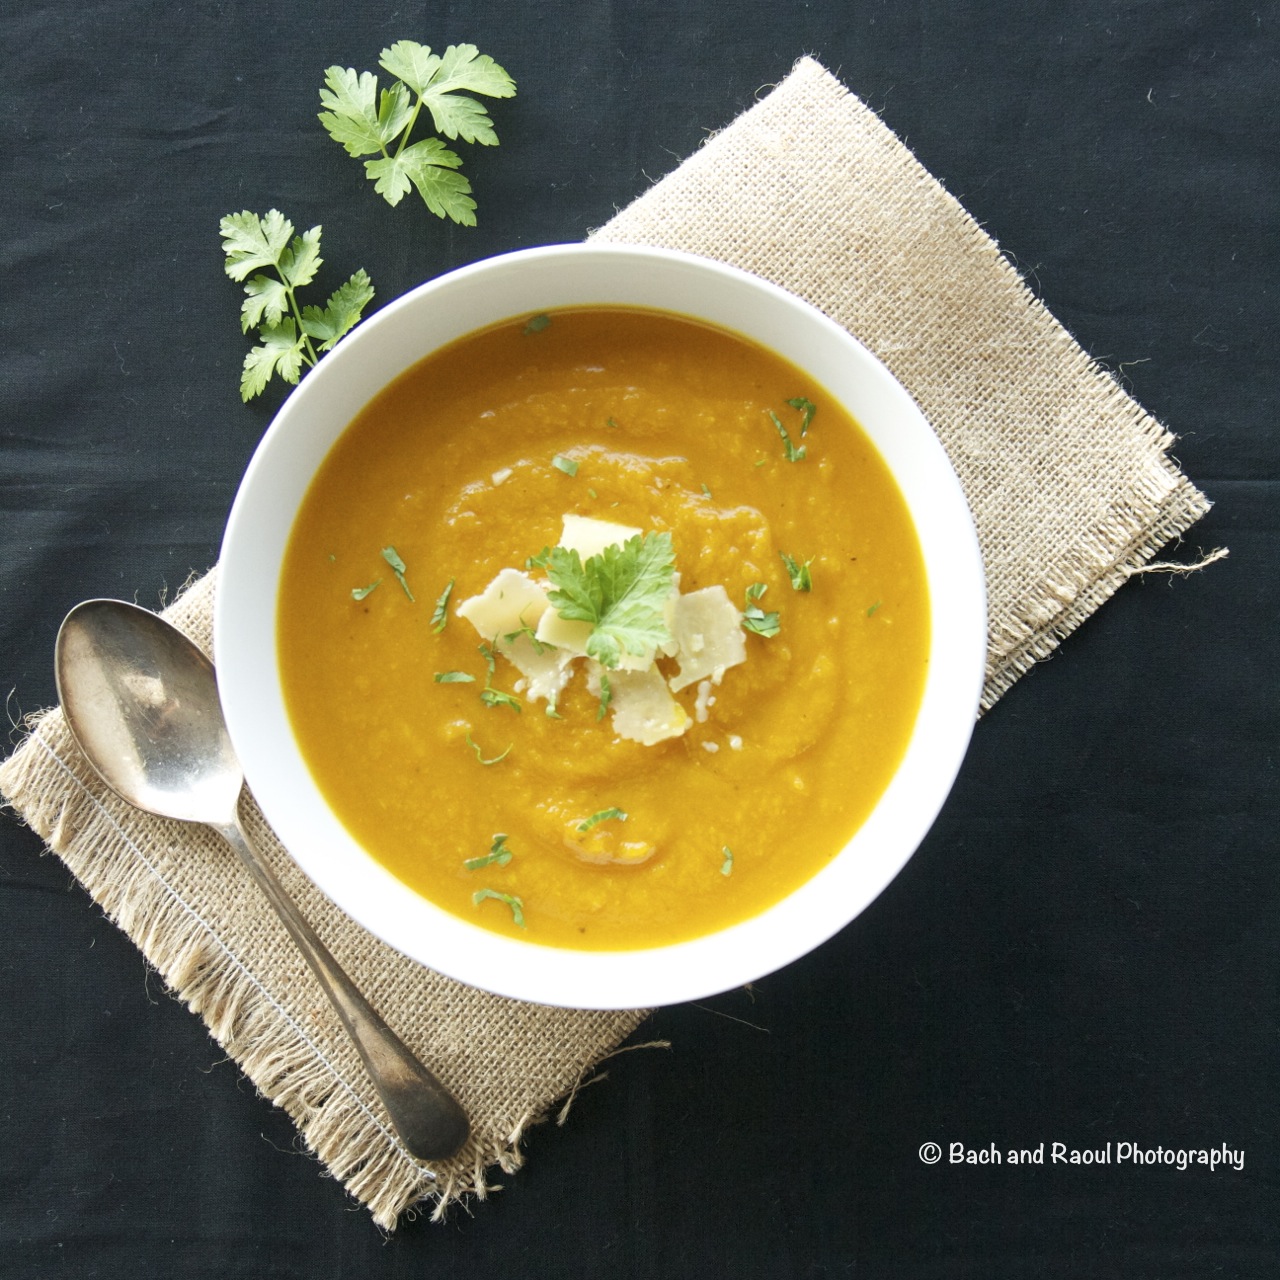 Roasted Pumpkin Soup with Aged Cheddar | Taste Chronicles